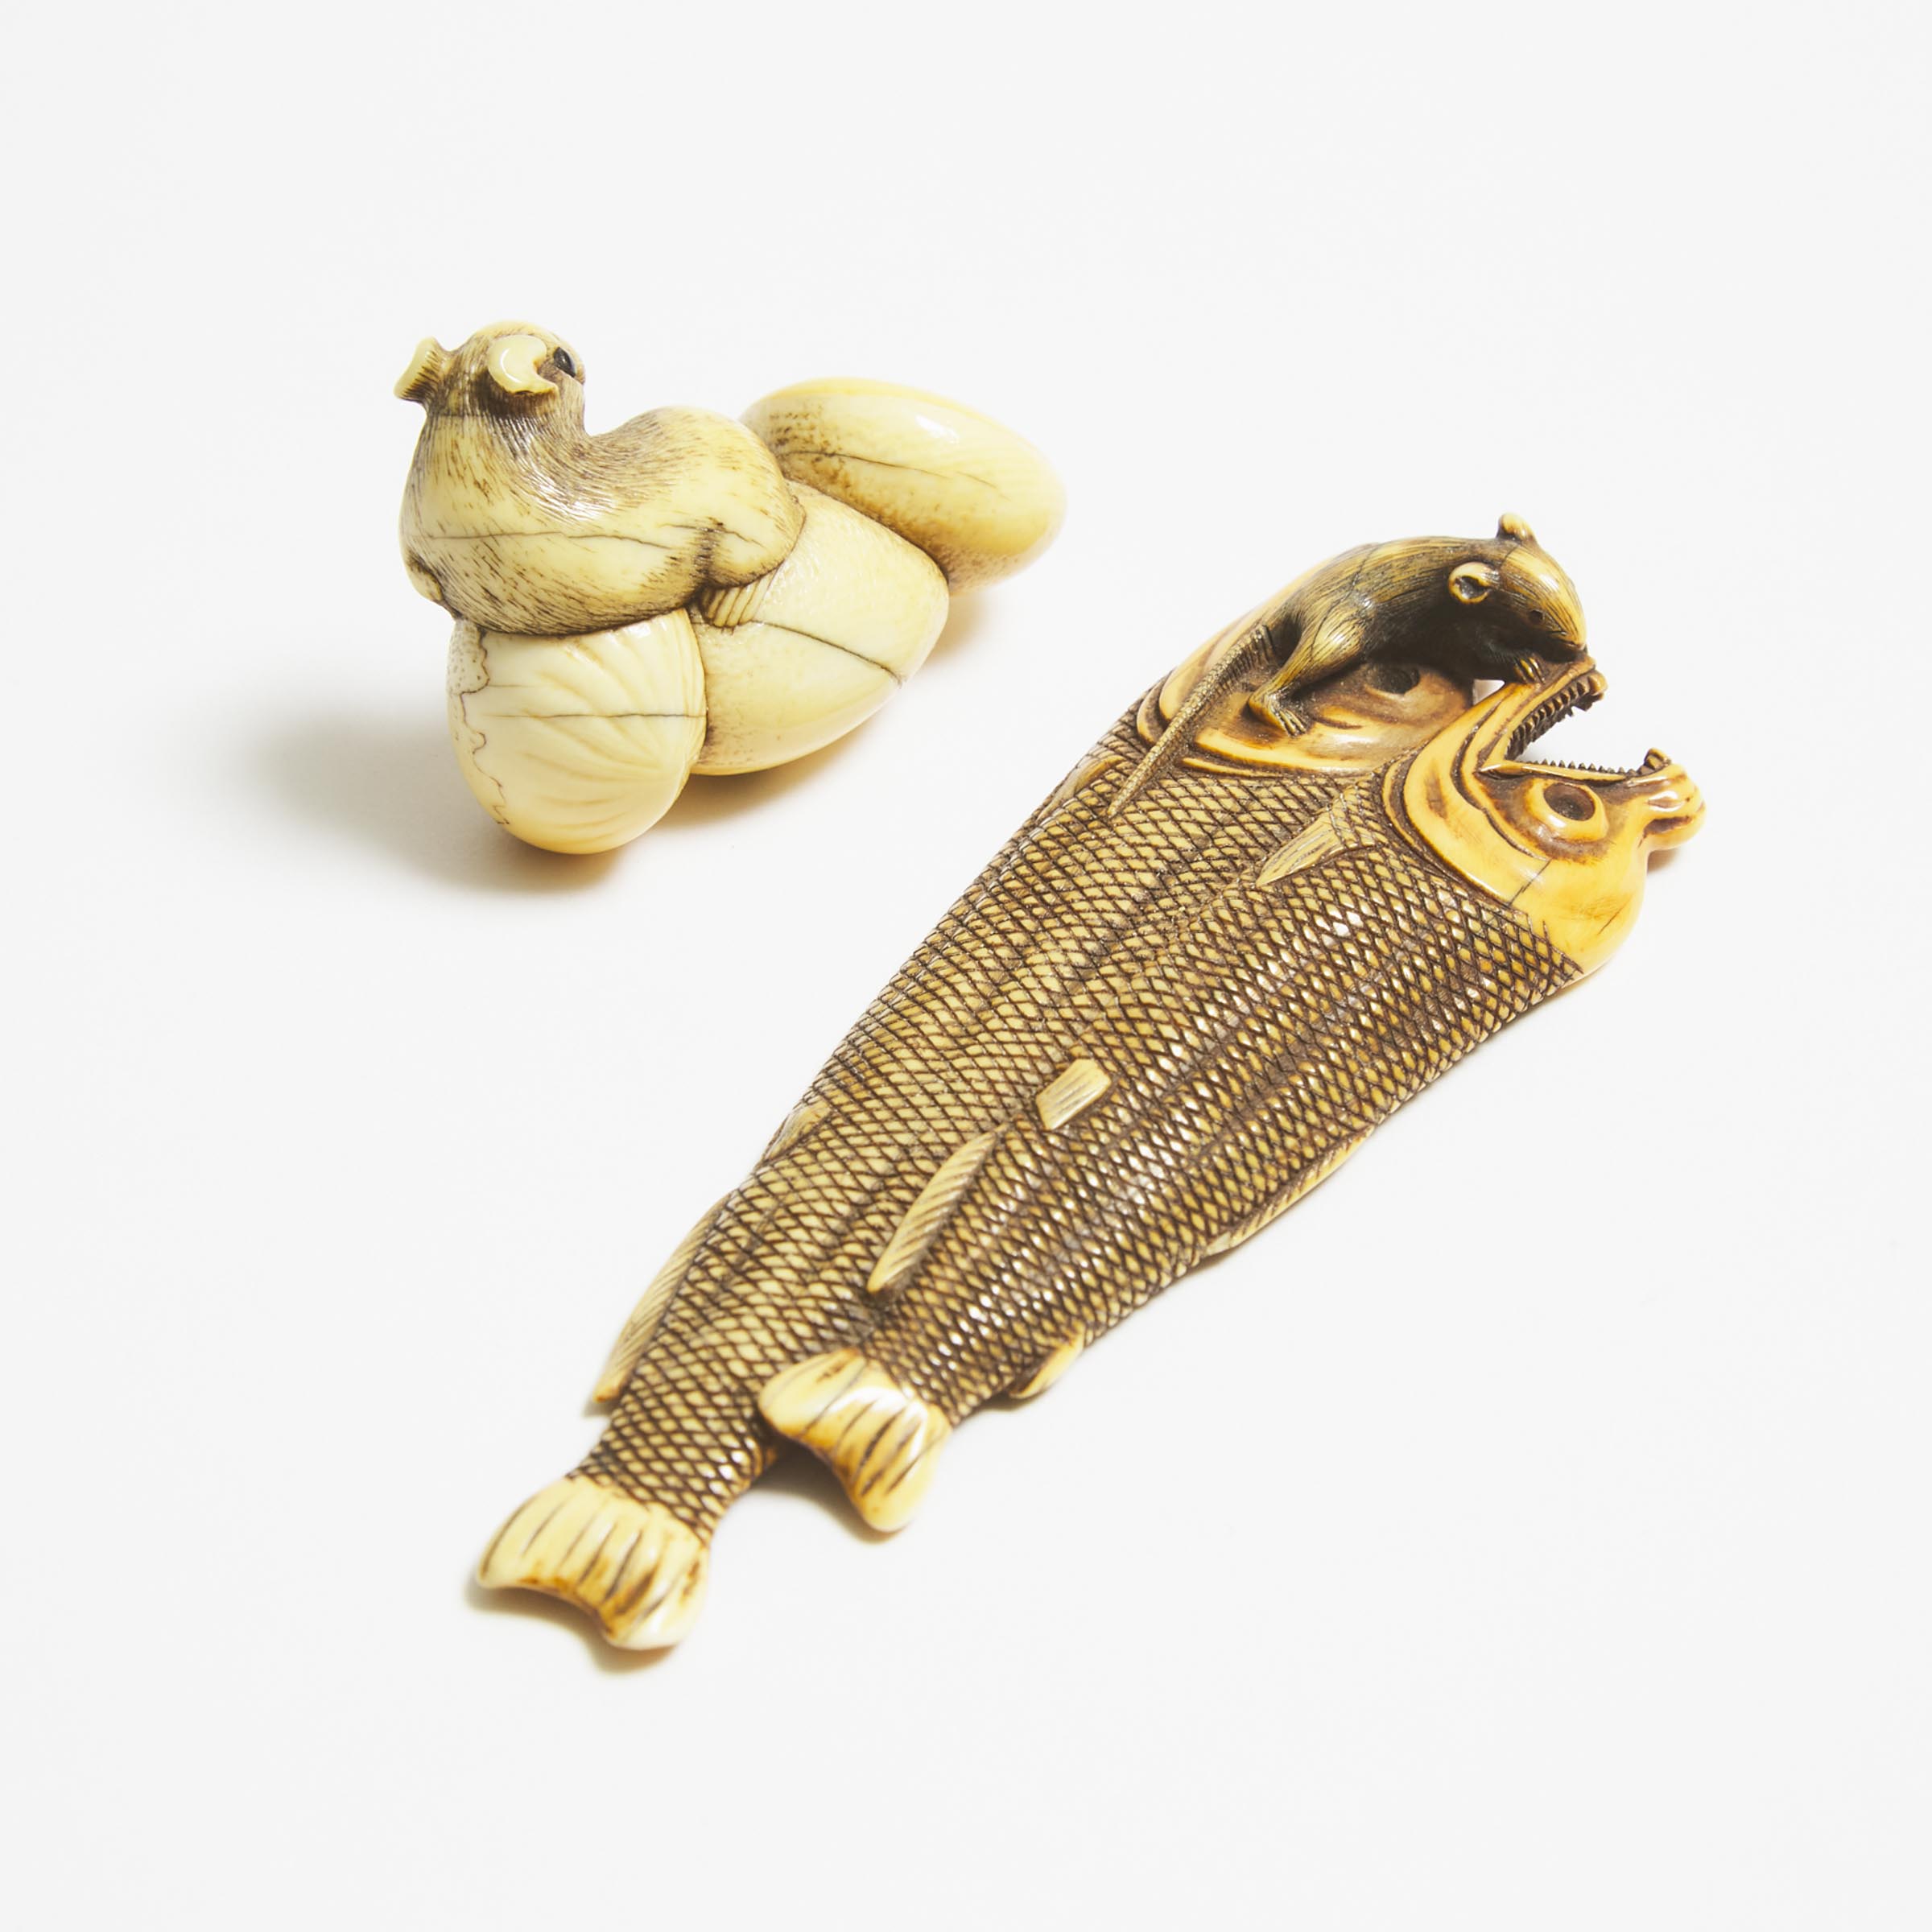 Two Ivory Netsuke of a Rat on Dried Salmon and a Rat on Chestnuts, Mid to Late 19th Century